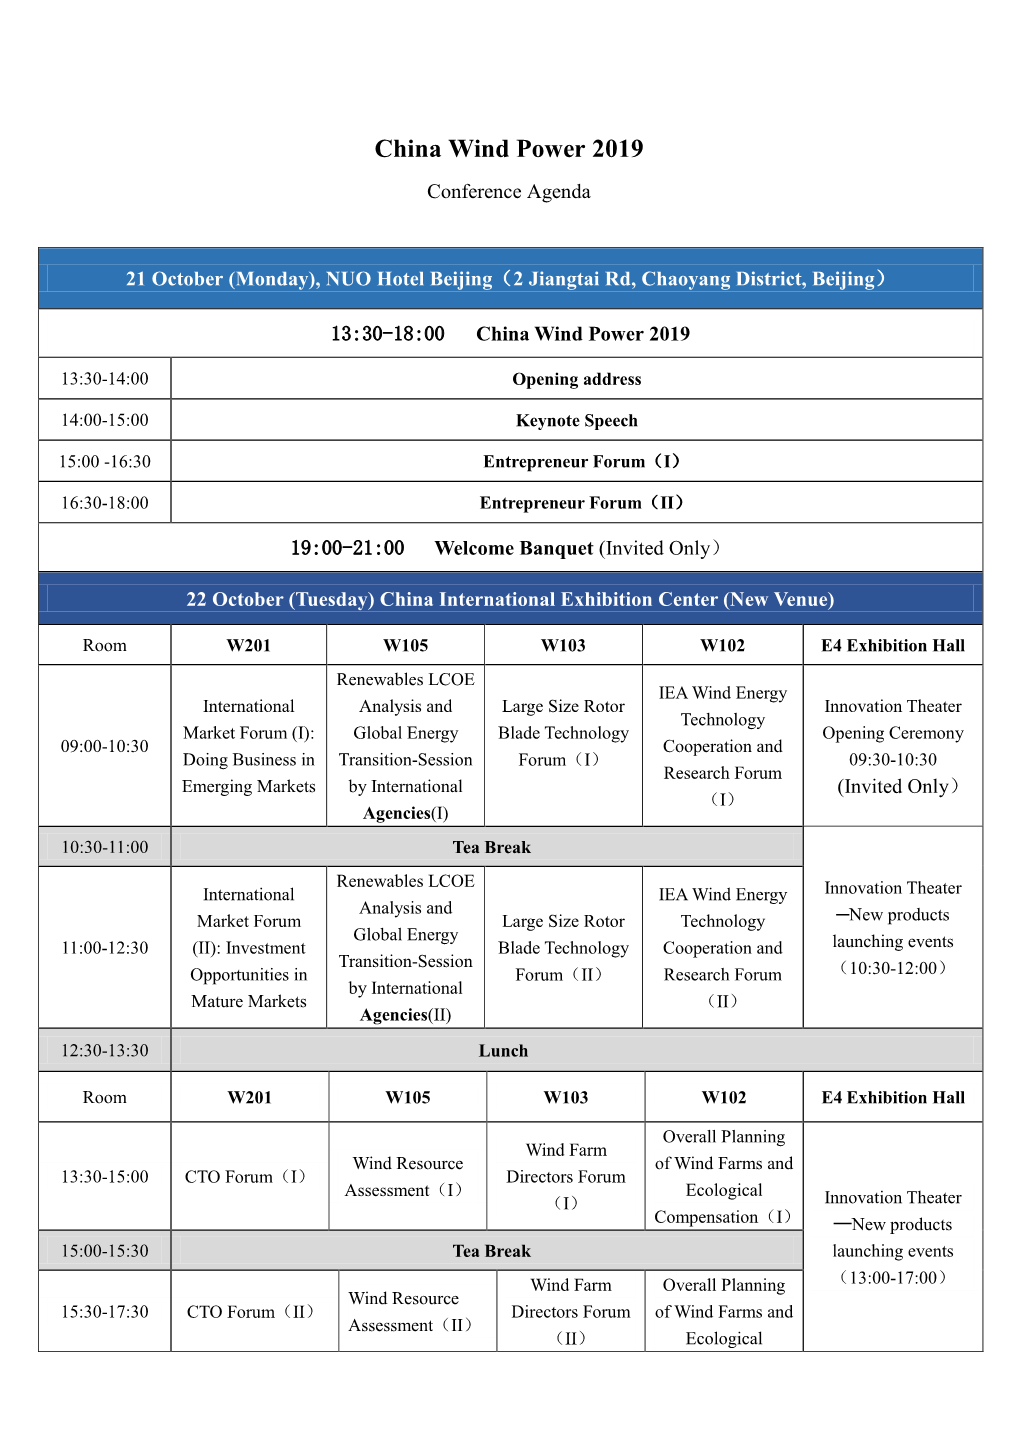 China Wind Power 2019 Conference Agenda